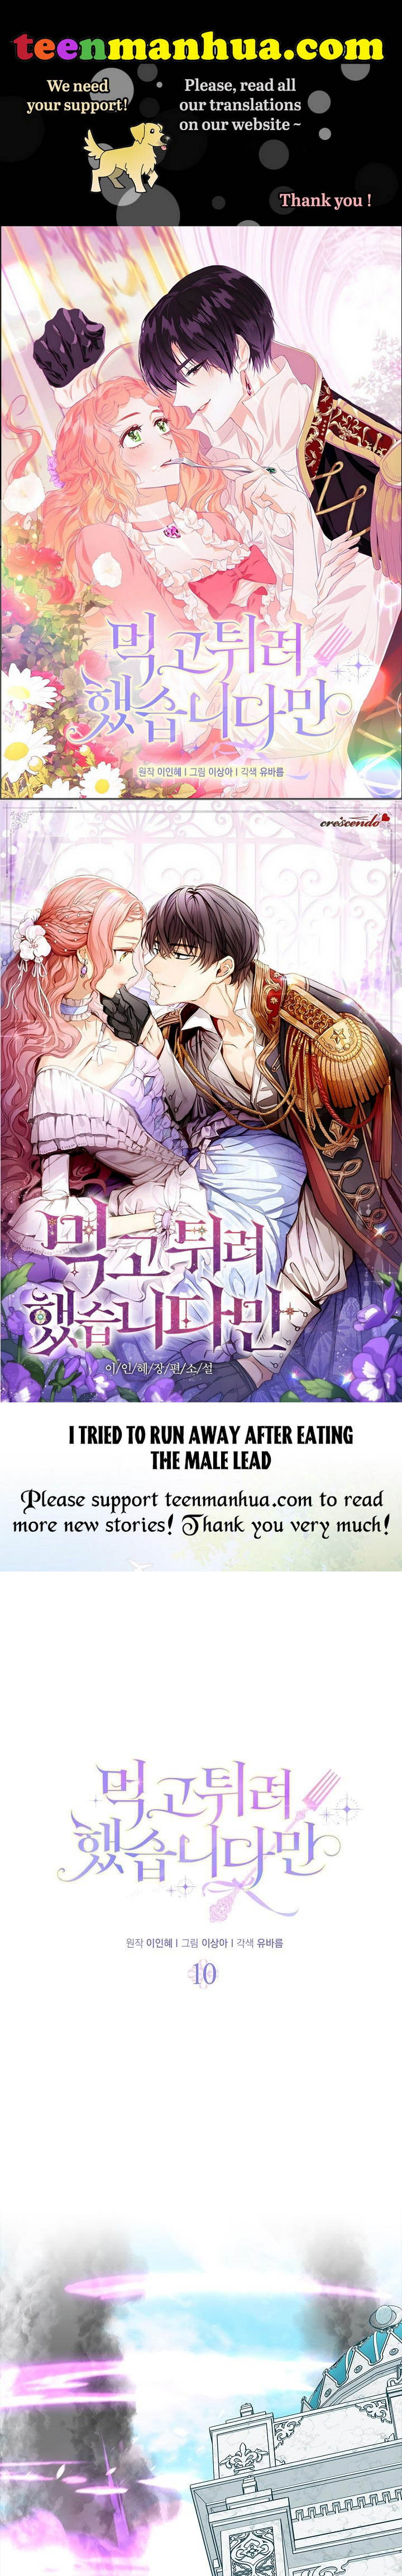 I tried to run away after eating the male lead Chapter 10